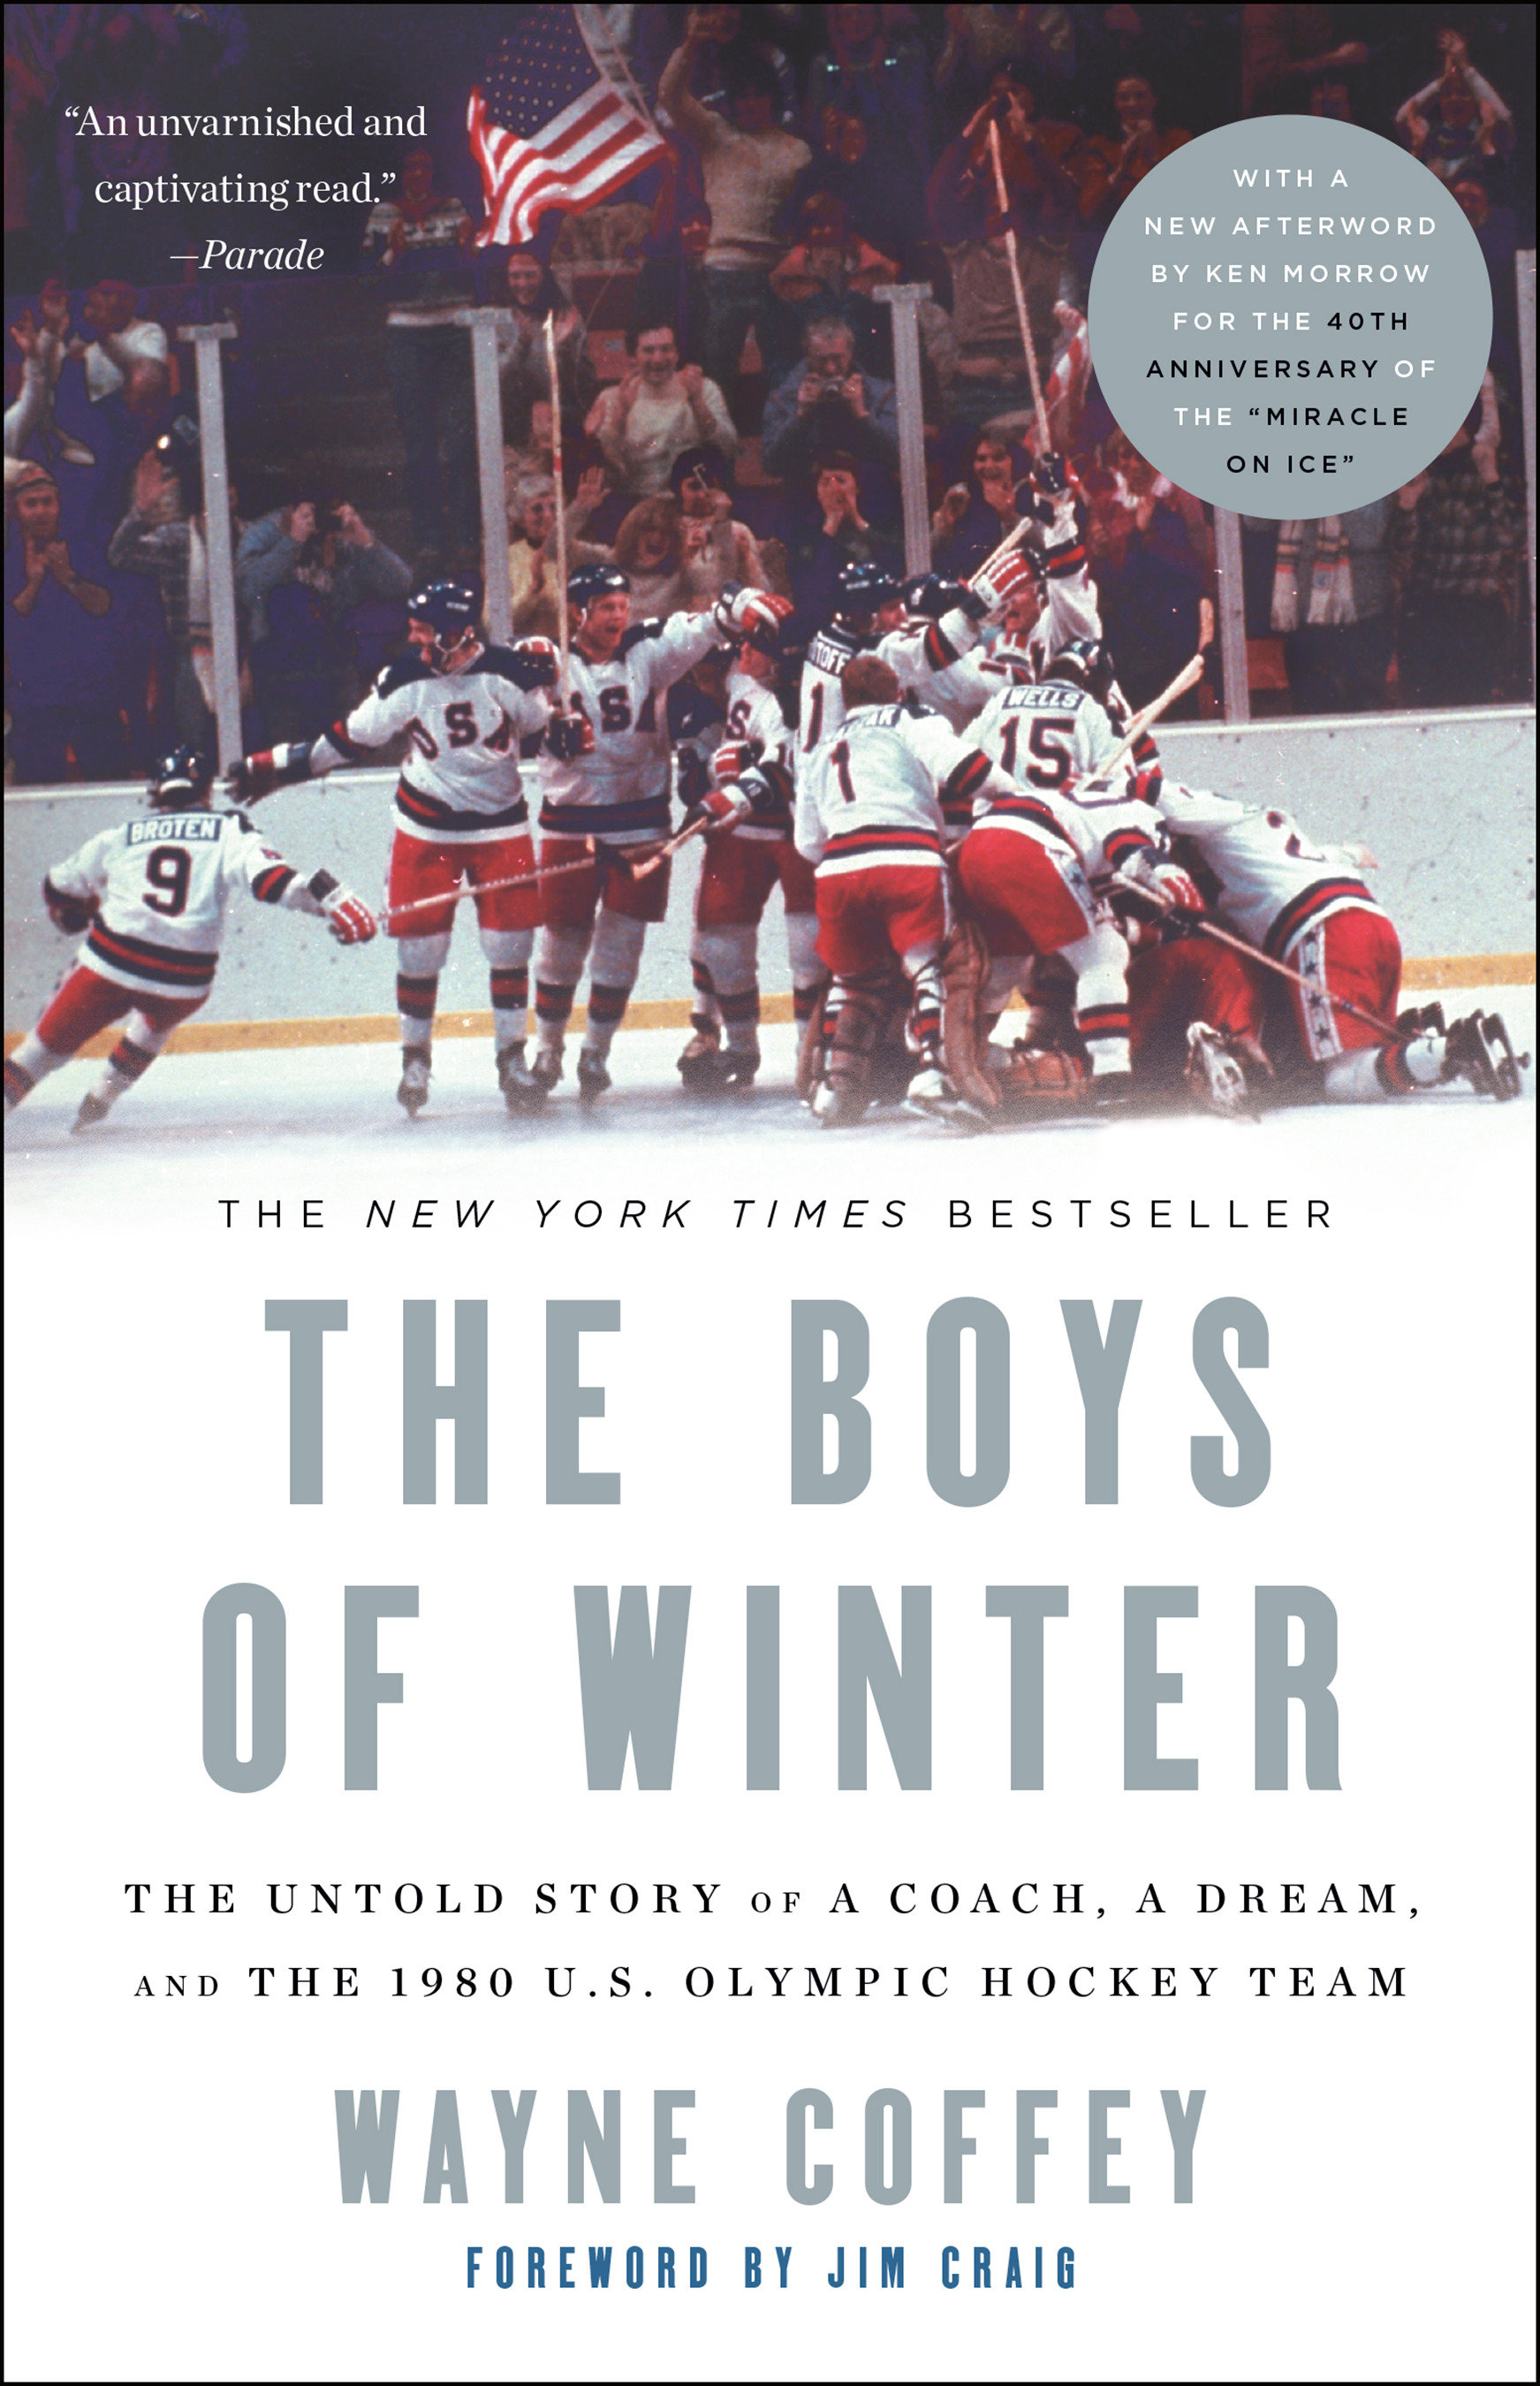 The boys of winter the untold story of a coach, a dream, and the 1980 U.S. Olympic hockey team cover image